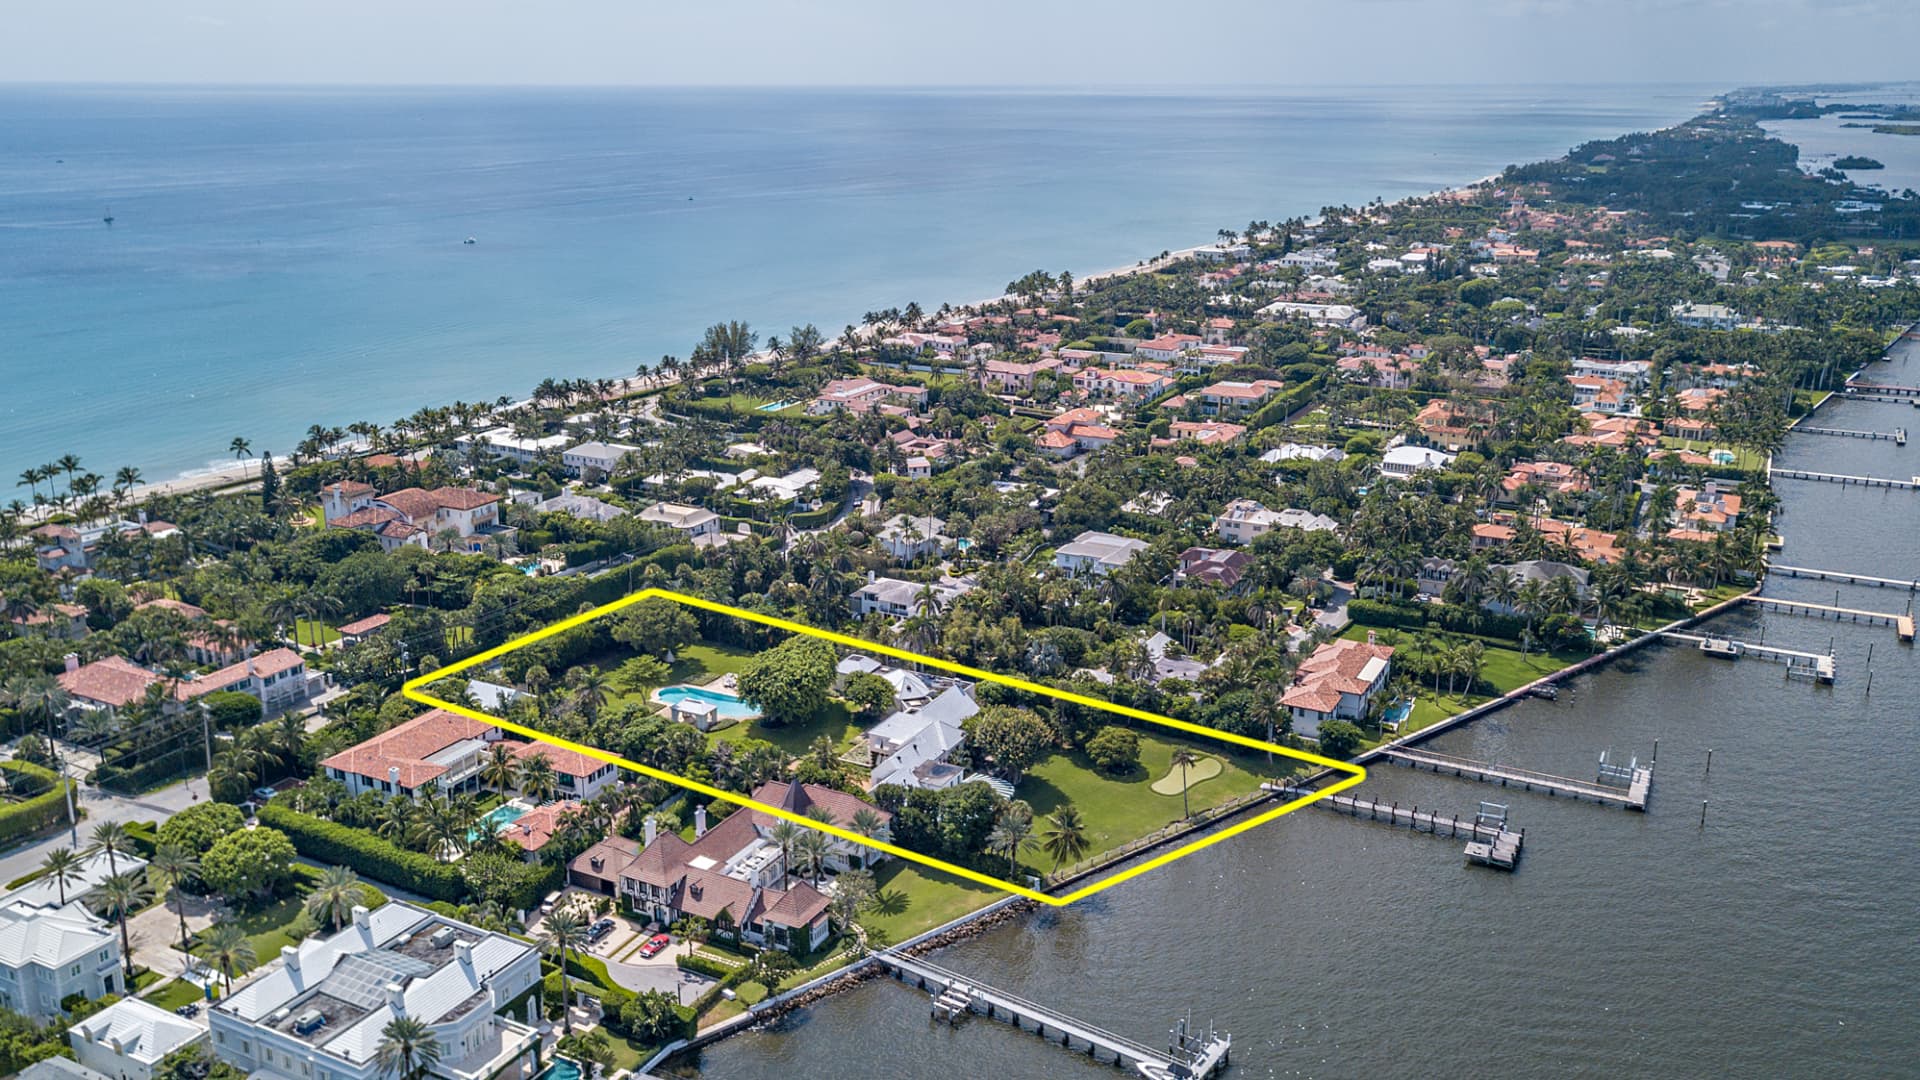 Aerial view of the $53 million Palm Beach home that delivered the top sale for Q1 2022 in South Florida.